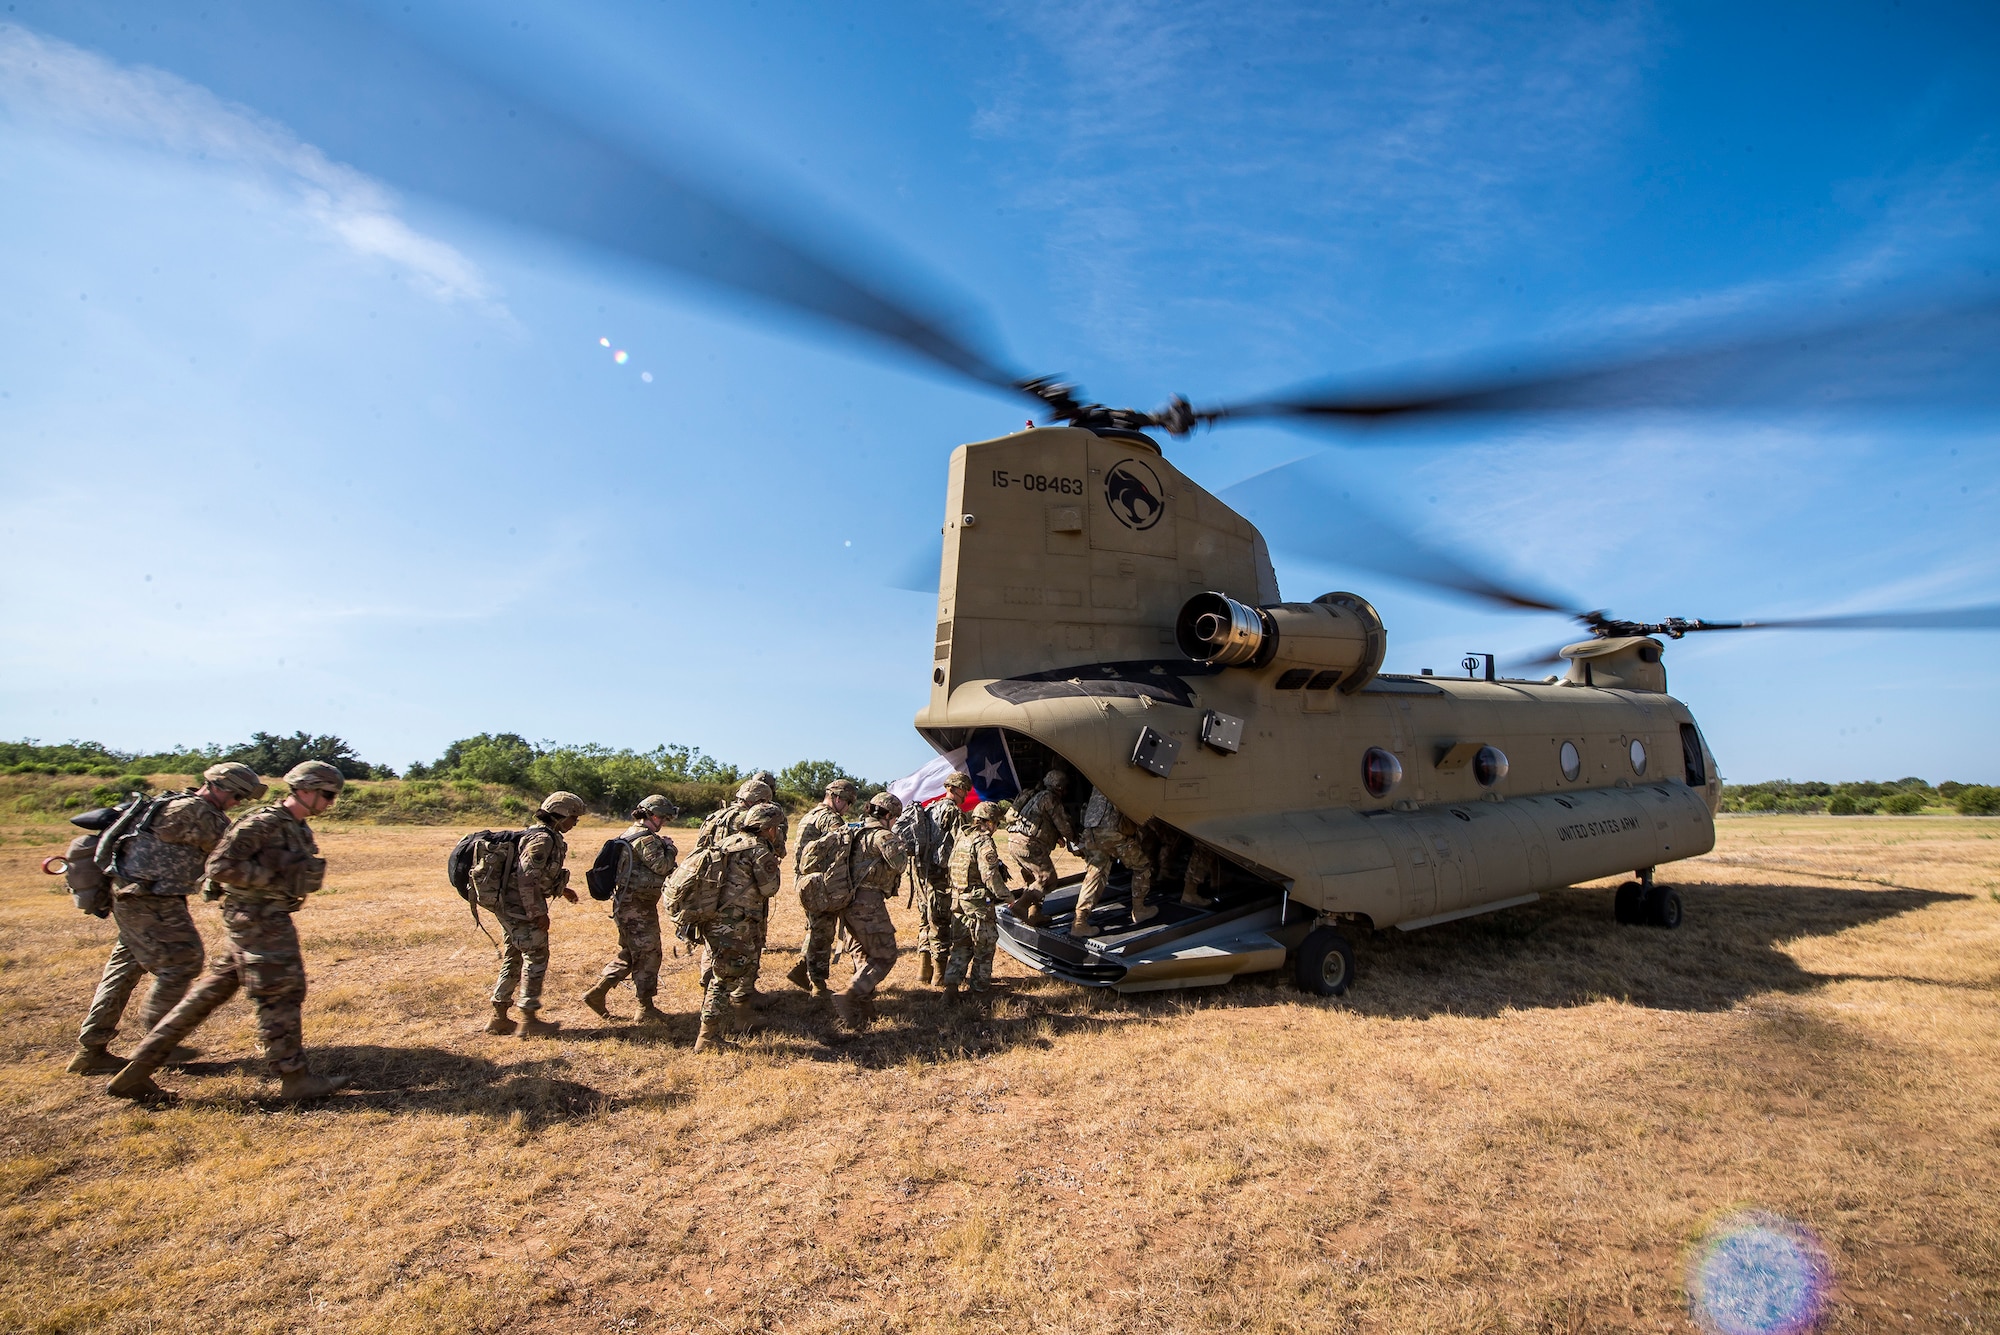 Airmen from the 3d Weather Squadron (WS) enter a CH47-Chinook following a certification field exercise (CFX), August 2, 2019, at Camp Bowie Training Center, Texas. The CFX was designed to evaluate the squadron’s overall tactical ability and readiness to provide the U.S. Army with full spectrum environmental support to the Joint Task Force (JTF) fight. While deployed, the Army relies on the 3d WS to provide them with current ground weather reports. These reports are then employed by commanders on the ground as they plan the best tactics and approaches to accomplish the mission. (U.S. Air Force photo by Airman 1st Class Eugene Oliver)